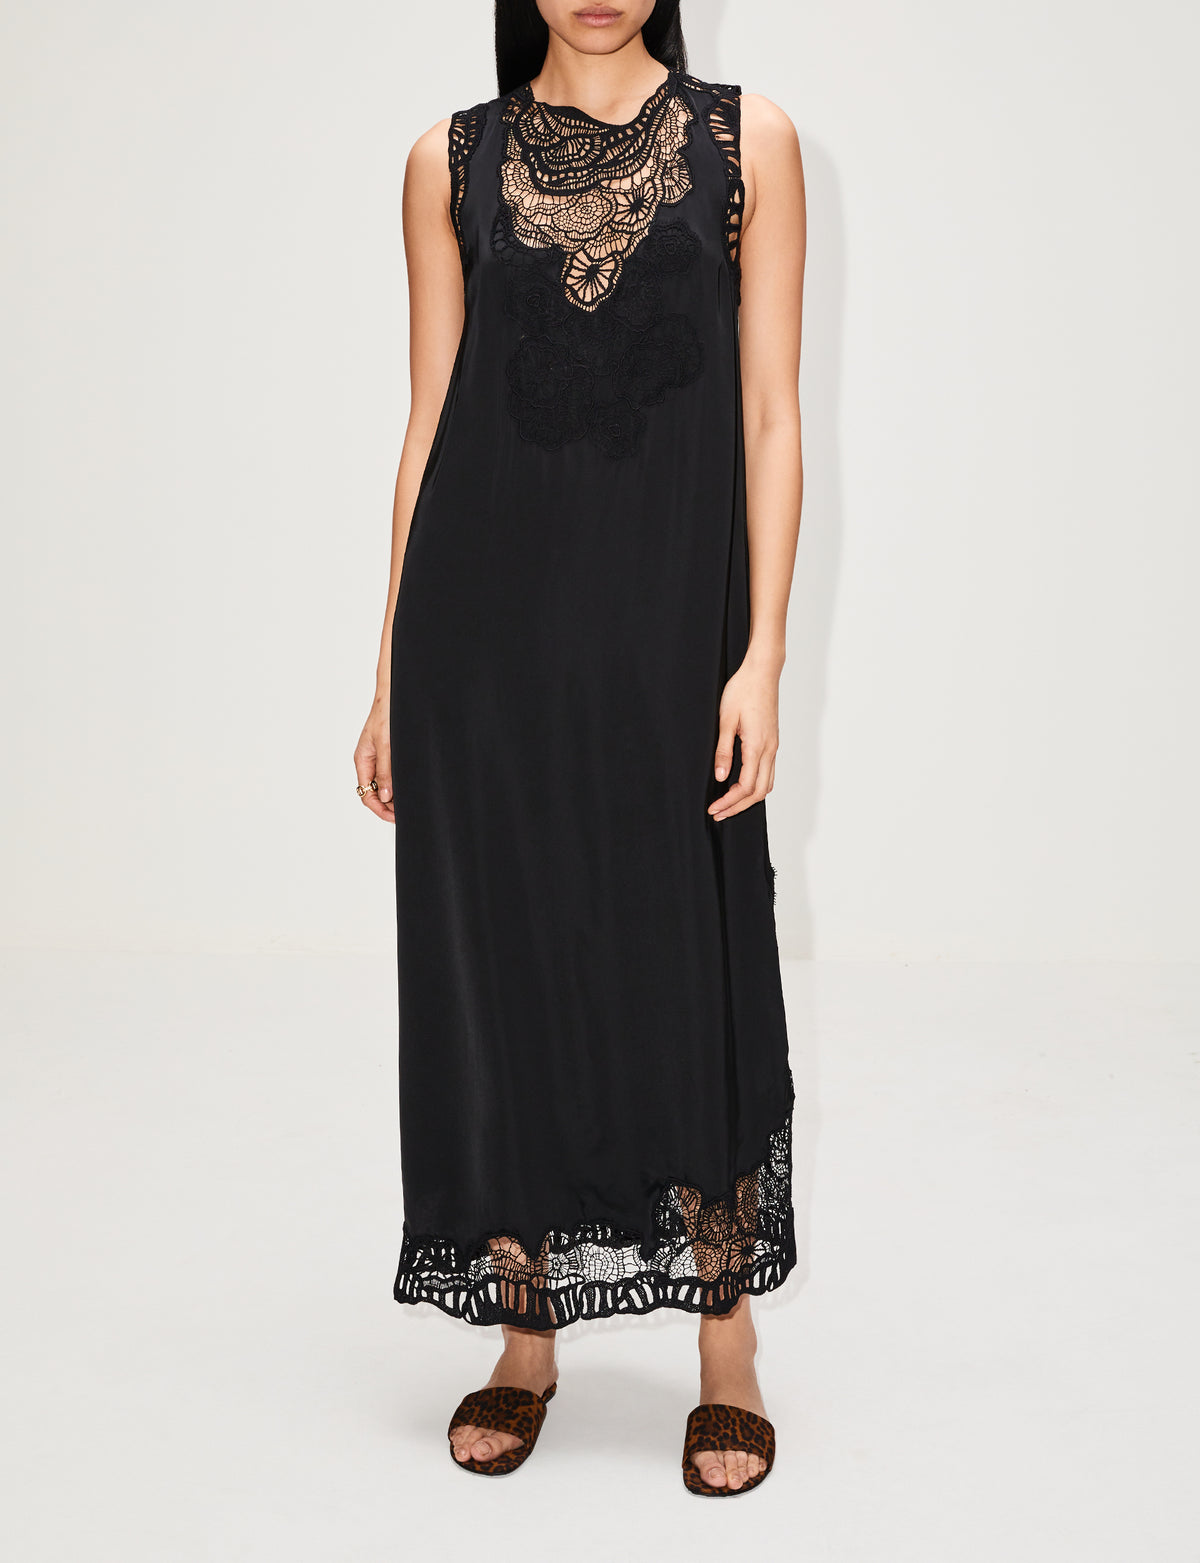 view 2 - Sleeveless Lace Front Dress